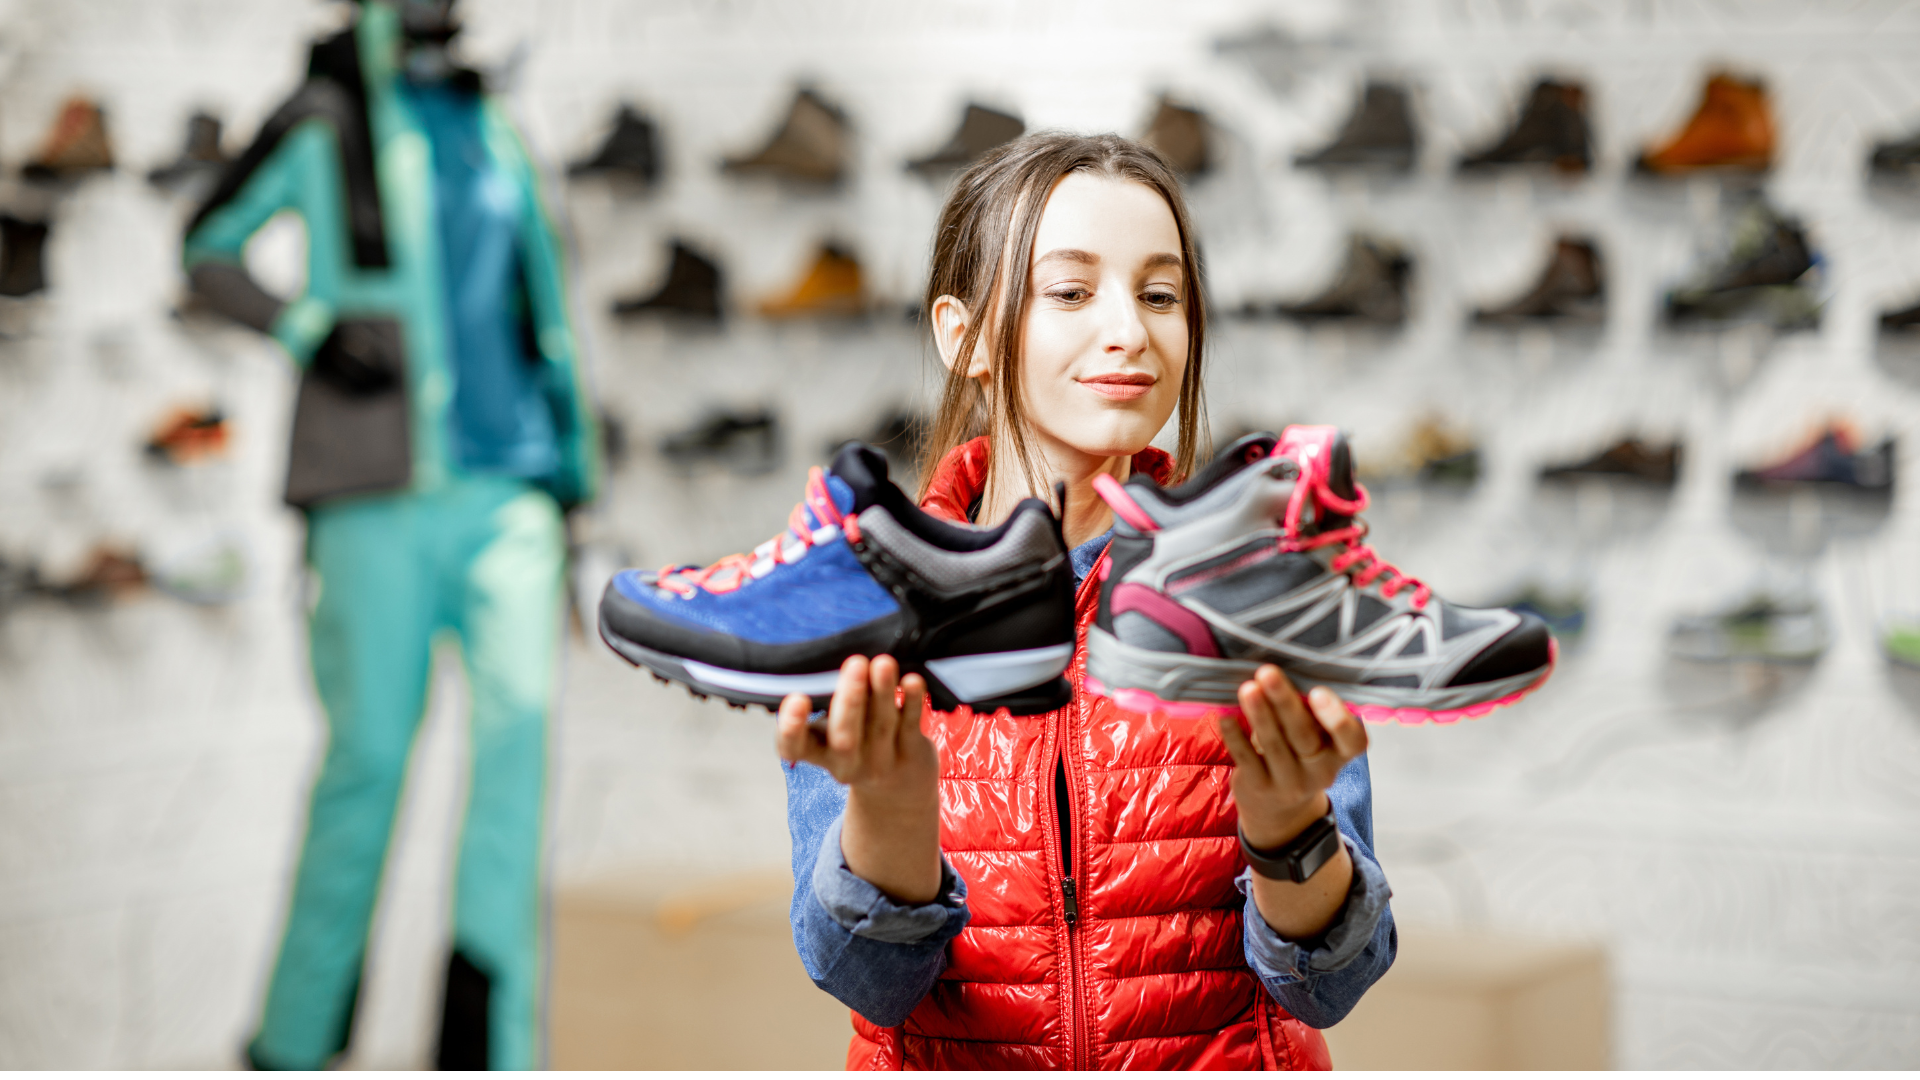 Quiet Appointments for back-to-school shoe shopping. Read our honest review.